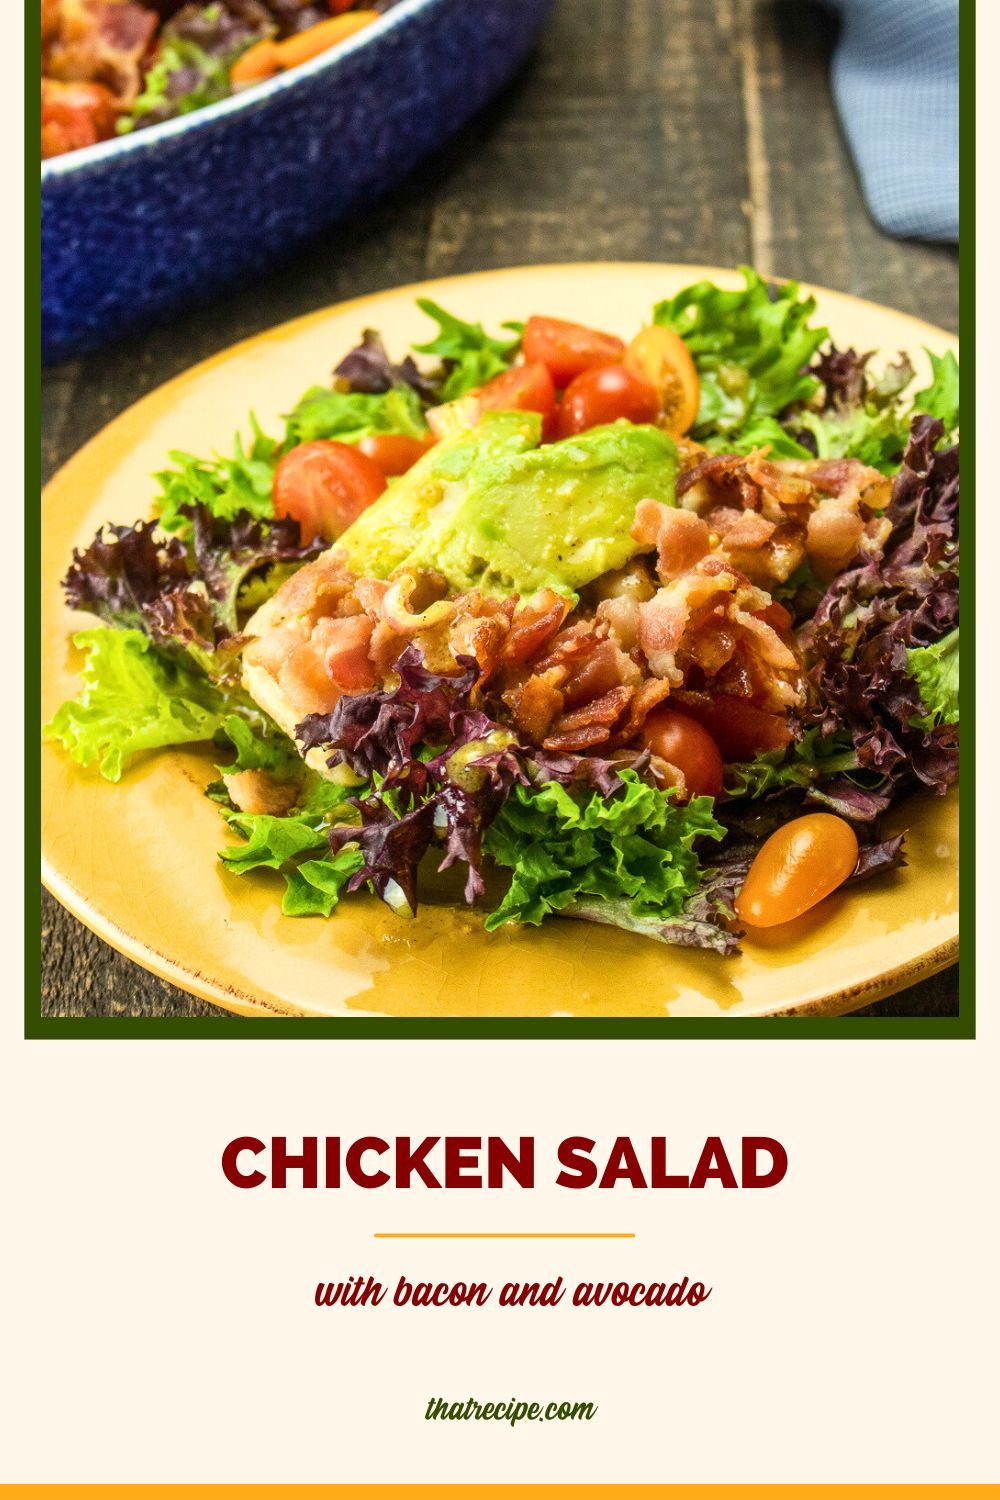 salad on a plate with text overlay "chicken, bacon and avocado salad"